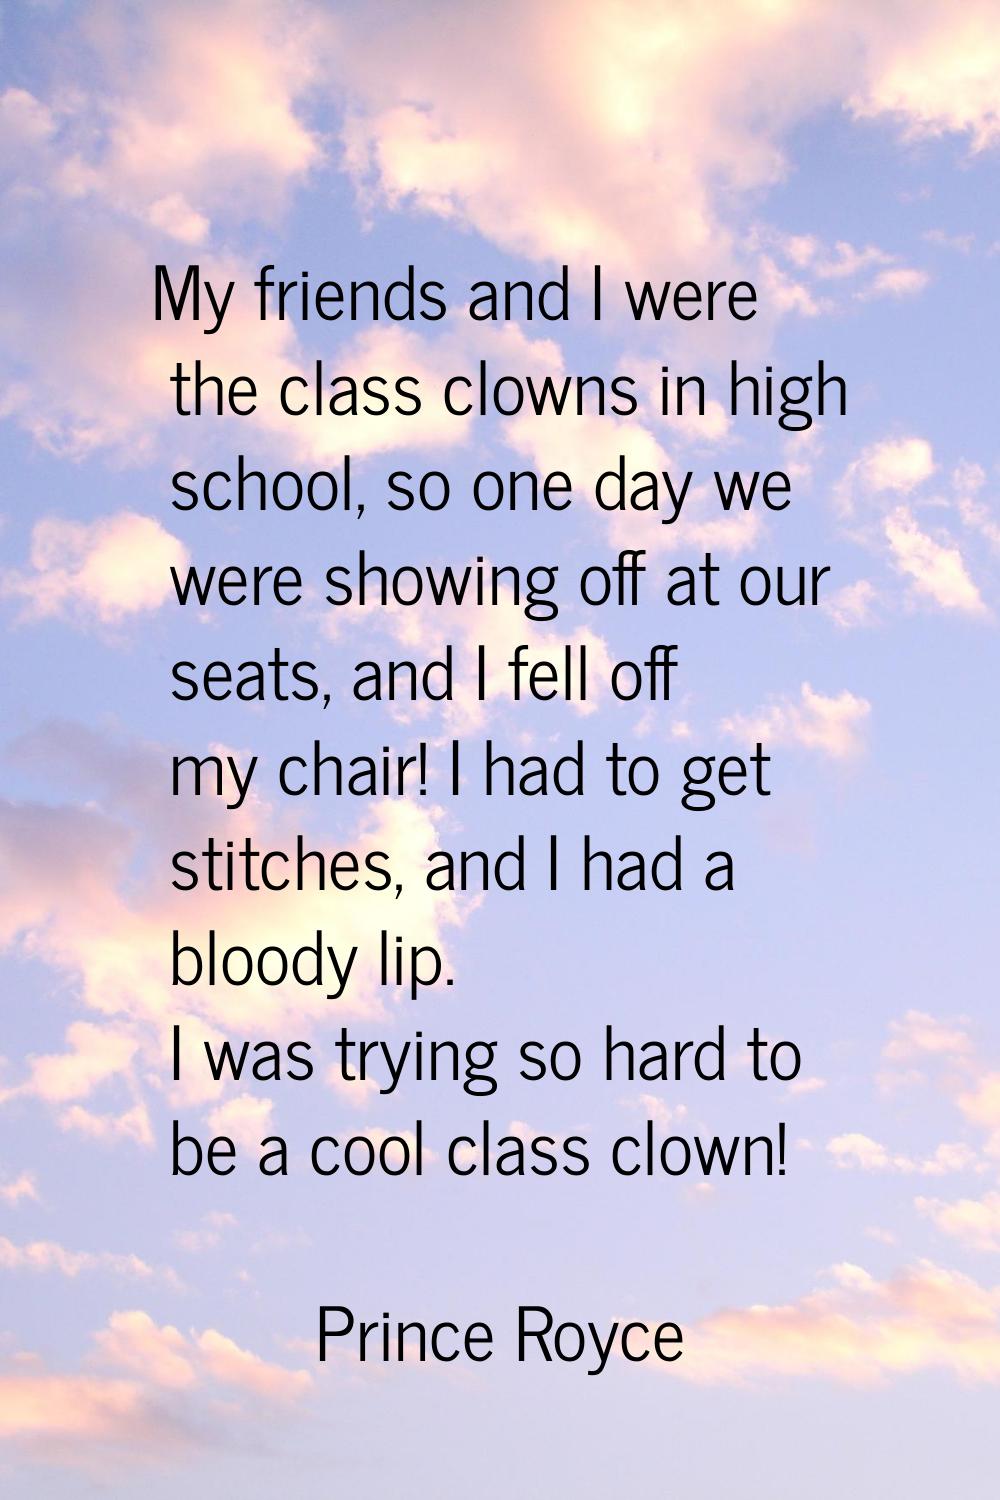 My friends and I were the class clowns in high school, so one day we were showing off at our seats,